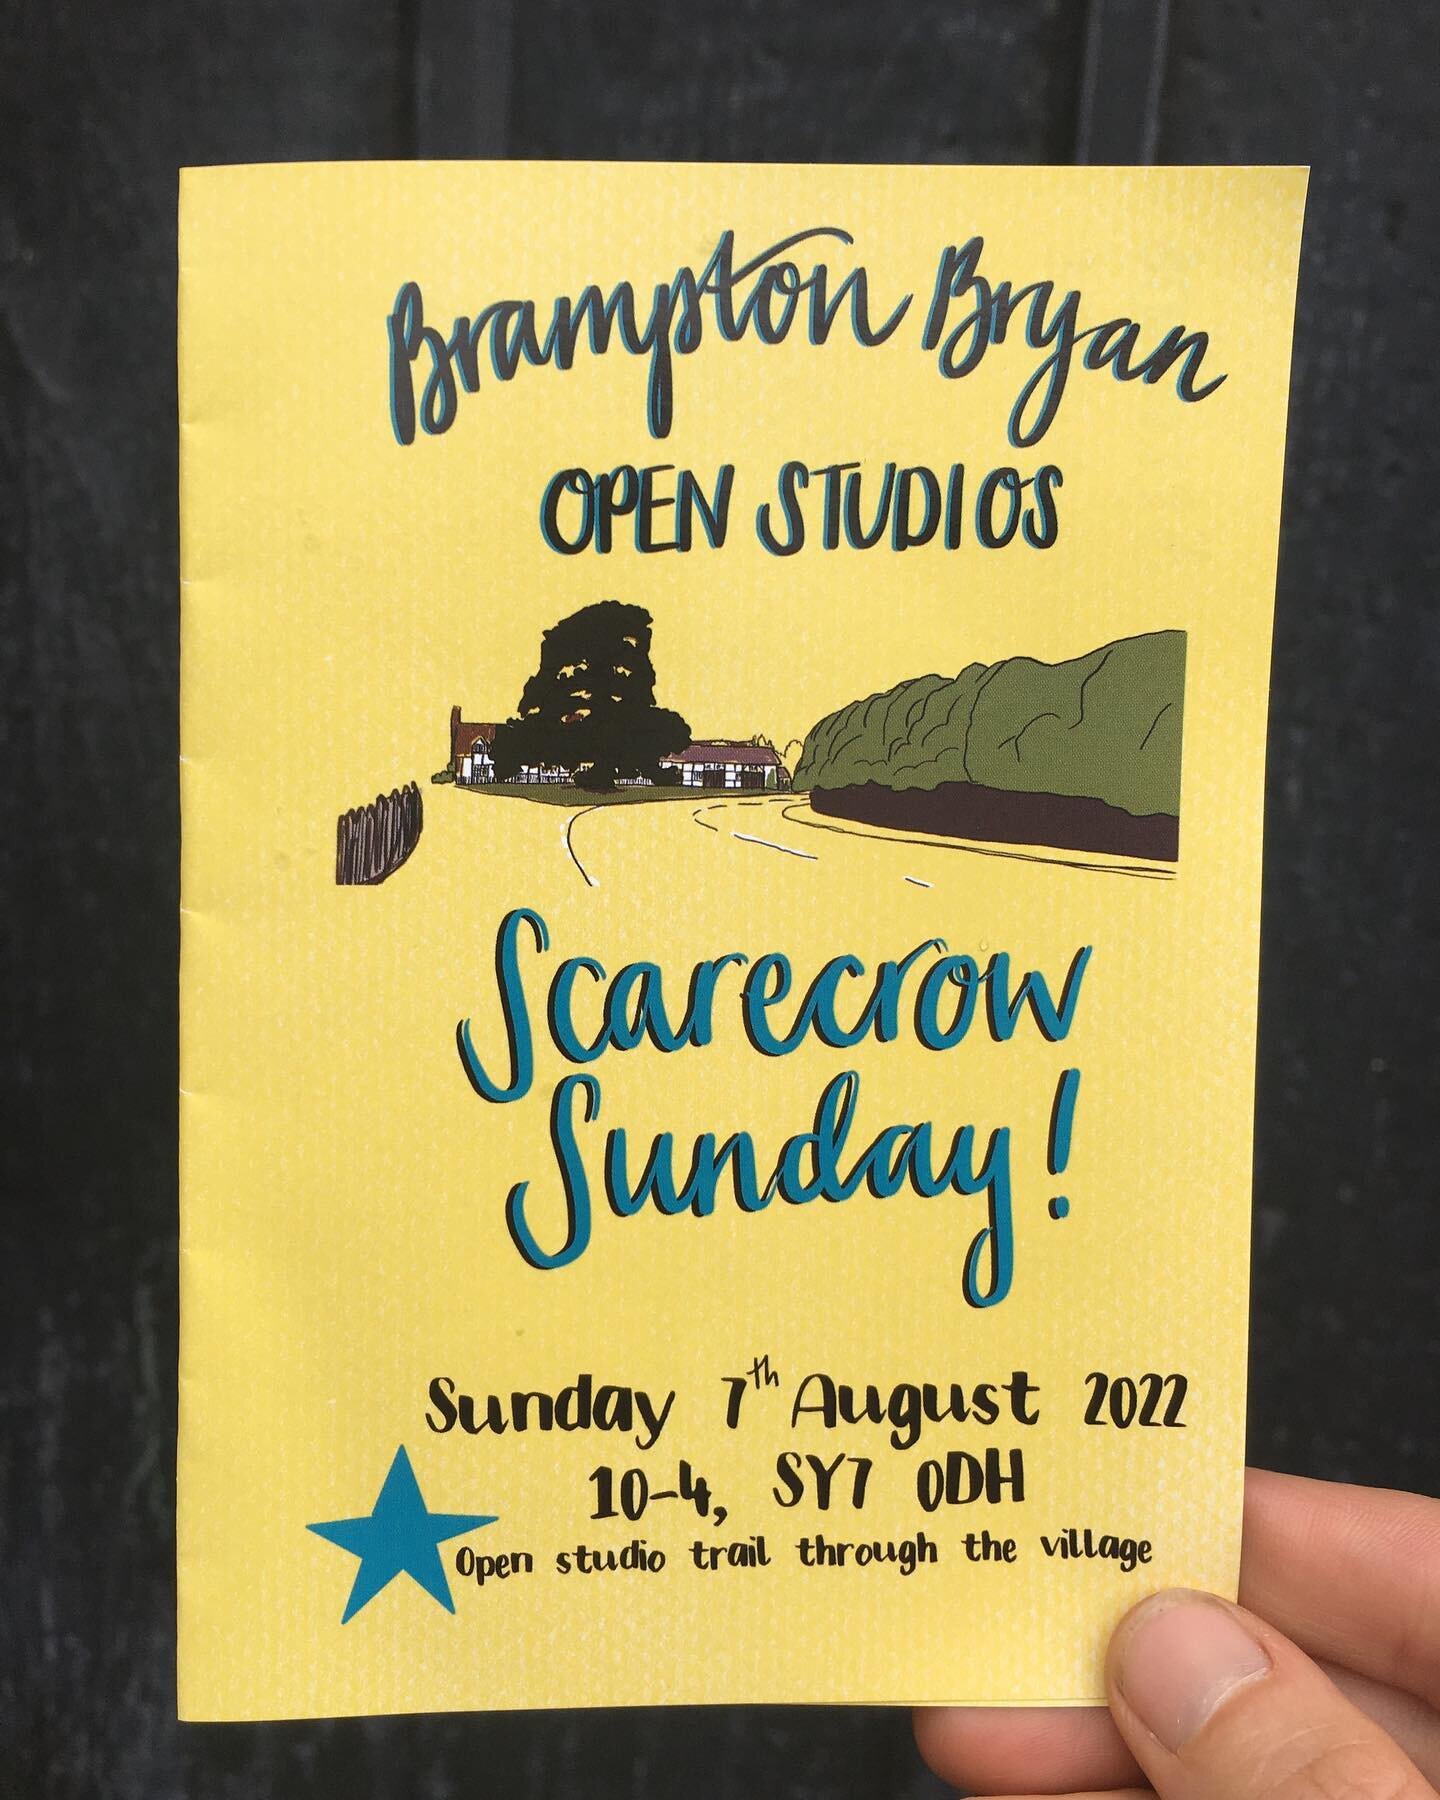 It&rsquo;s that Brampton Bryan Scarecrow Day time of year again! Come along next Sunday 7th August when @alicedrawstheline @felicitywarbrick @hannahdaviestweed @hollyforge @gemicake , Bron Crafts and I will be opening our studios to the public and se